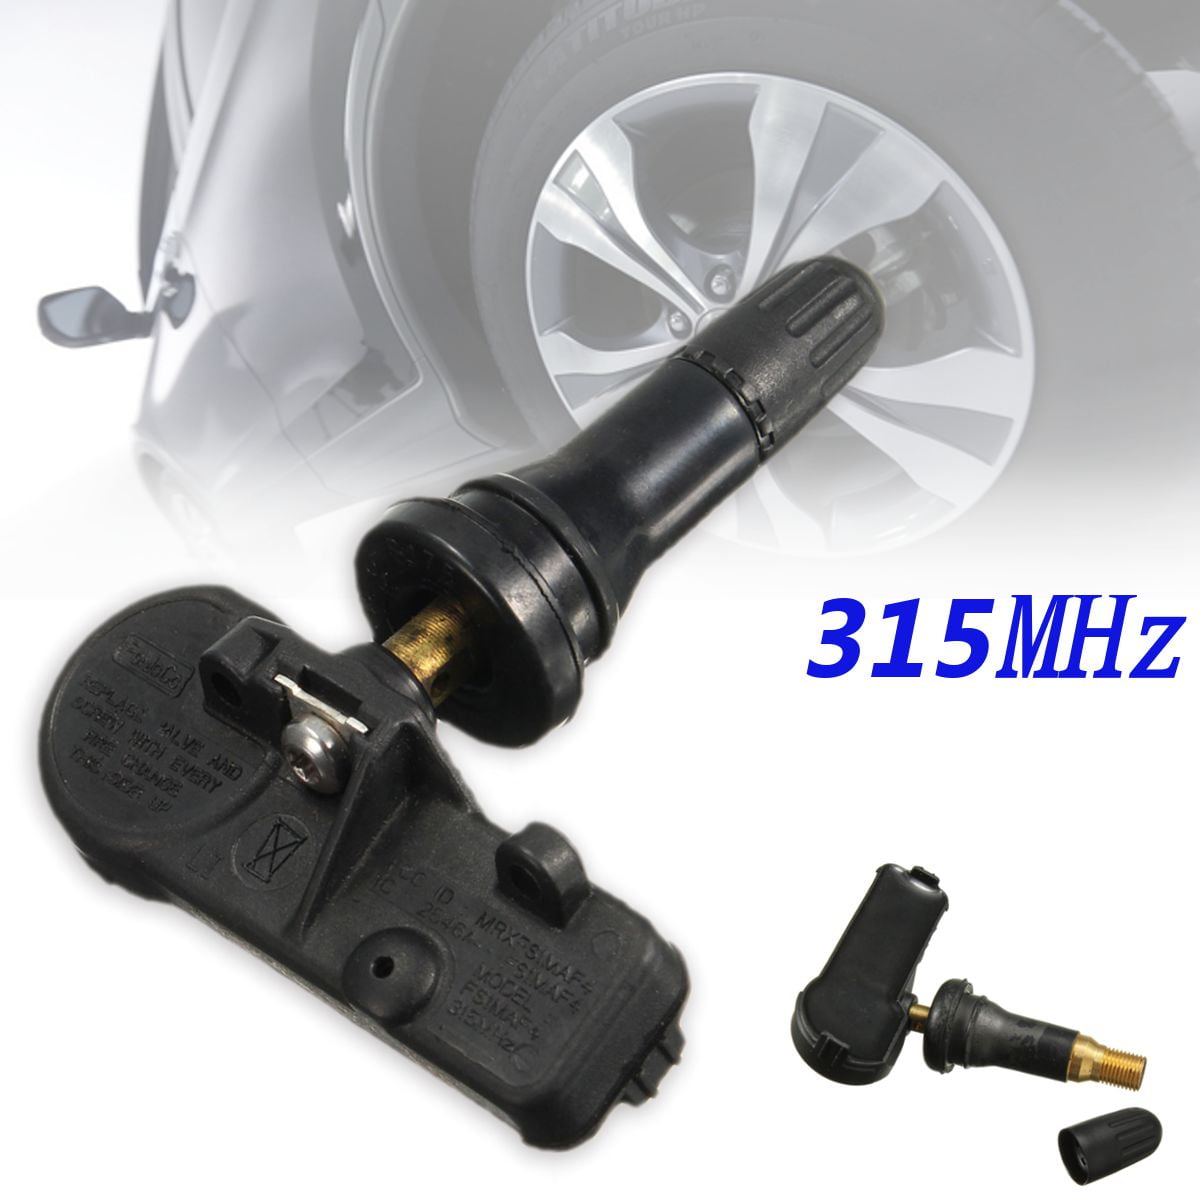 1 TPMS Tire Pressure Sensor 315Mhz Rubber for 11-15 Chevy Cruze 